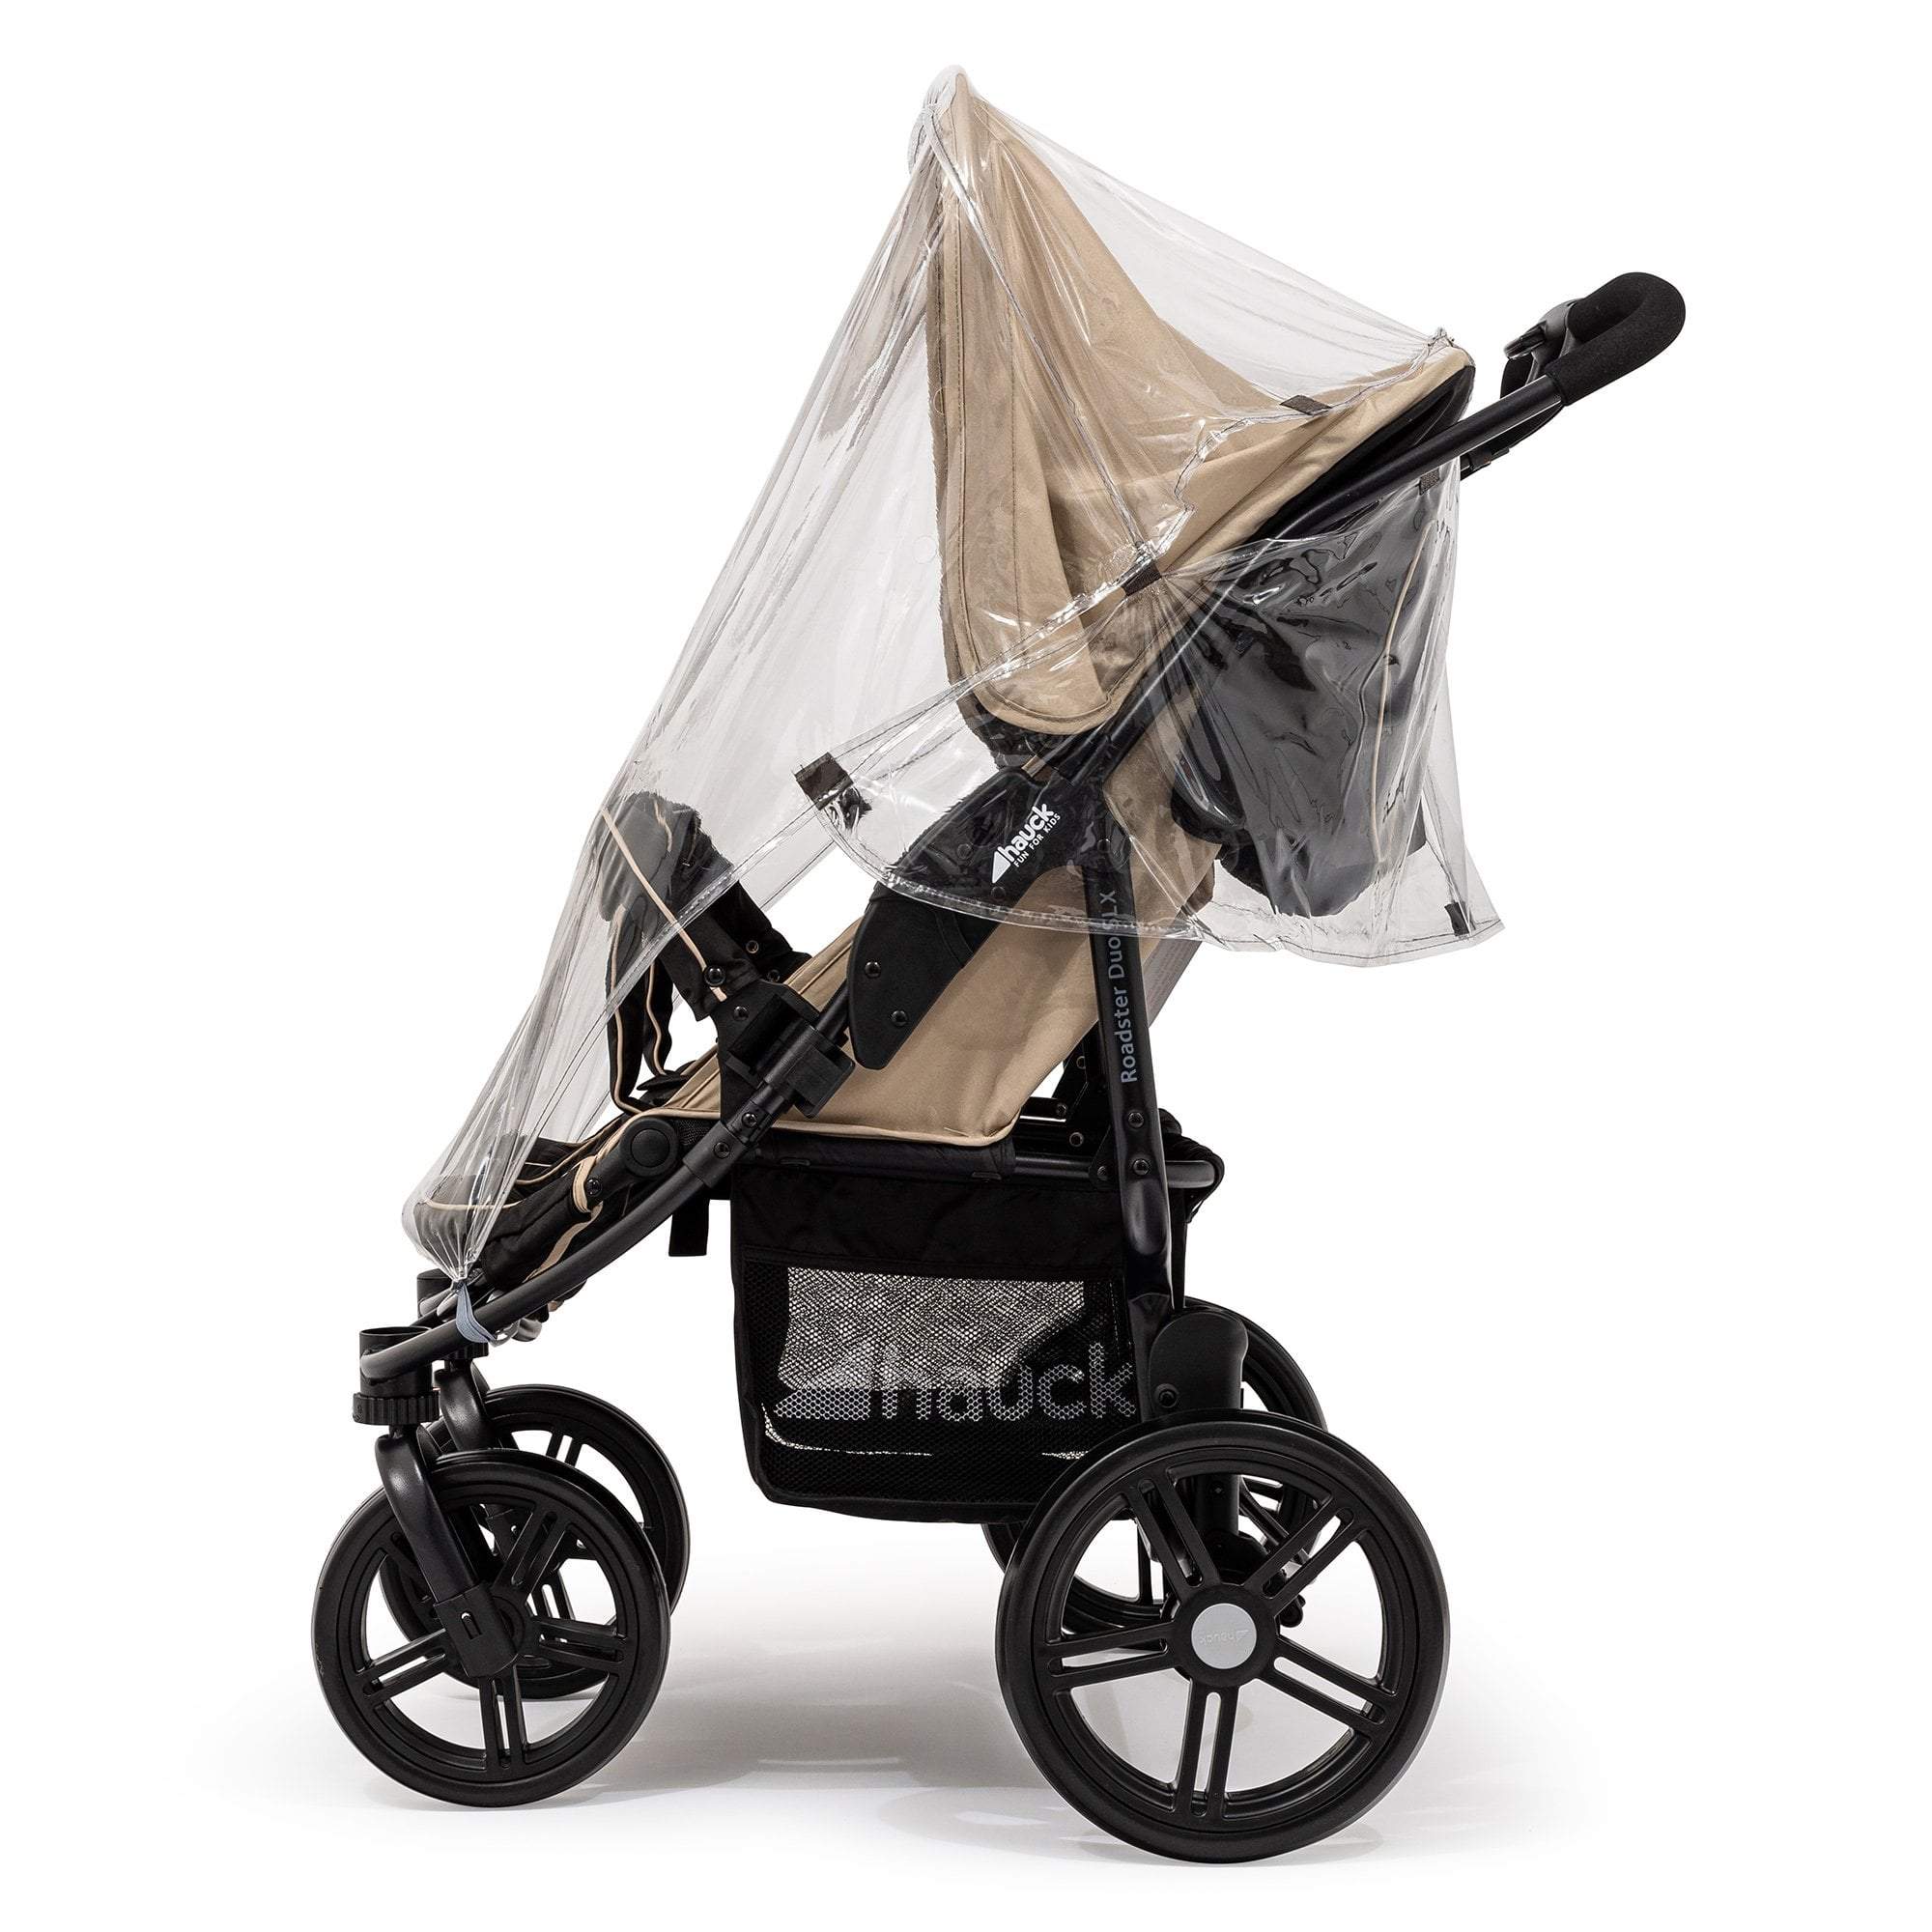 Side by Side Raincover Compatible with Hauck - For Your Little One